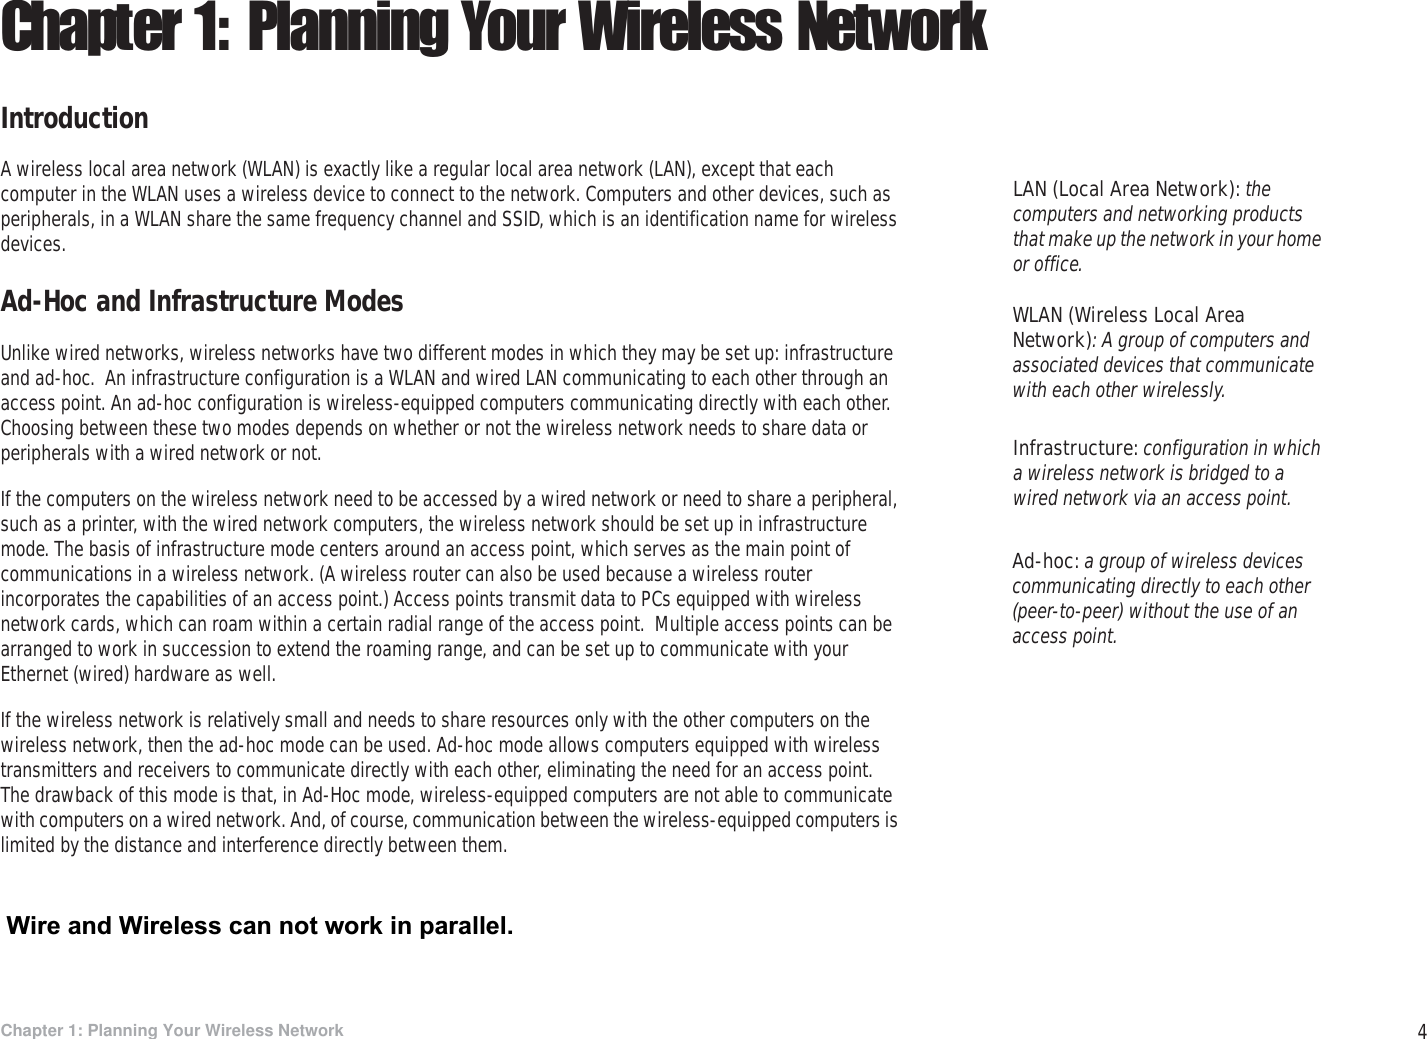 4Chapter 1: Planning Your Wireless NetworkIntroductionWireless-G PTZ Internet Camera with AudioChapter 1: Planning Your Wireless NetworkIntroductionA wireless local area network (WLAN) is exactly like a regular local area network (LAN), except that each computer in the WLAN uses a wireless device to connect to the network. Computers and other devices, such as peripherals, in a WLAN share the same frequency channel and SSID, which is an identification name for wireless devices.Ad-Hoc and Infrastructure ModesUnlike wired networks, wireless networks have two different modes in which they may be set up: infrastructure and ad-hoc.  An infrastructure configuration is a WLAN and wired LAN communicating to each other through an access point. An ad-hoc configuration is wireless-equipped computers communicating directly with each other. Choosing between these two modes depends on whether or not the wireless network needs to share data or peripherals with a wired network or not.If the computers on the wireless network need to be accessed by a wired network or need to share a peripheral, such as a printer, with the wired network computers, the wireless network should be set up in infrastructure mode. The basis of infrastructure mode centers around an access point, which serves as the main point of communications in a wireless network. (A wireless router can also be used because a wireless router incorporates the capabilities of an access point.) Access points transmit data to PCs equipped with wireless network cards, which can roam within a certain radial range of the access point.  Multiple access points can be arranged to work in succession to extend the roaming range, and can be set up to communicate with your Ethernet (wired) hardware as well.If the wireless network is relatively small and needs to share resources only with the other computers on the wireless network, then the ad-hoc mode can be used. Ad-hoc mode allows computers equipped with wireless transmitters and receivers to communicate directly with each other, eliminating the need for an access point.  The drawback of this mode is that, in Ad-Hoc mode, wireless-equipped computers are not able to communicate with computers on a wired network. And, of course, communication between the wireless-equipped computers is limited by the distance and interference directly between them.Infrastructure: configuration in which a wireless network is bridged to a wired network via an access point.LAN (Local Area Network): the computers and networking products that make up the network in your home or office.Ad-hoc: a group of wireless devices communicating directly to each other (peer-to-peer) without the use of an access point.WLAN (Wireless Local Area Network): A group of computers and associated devices that communicate with each other wirelessly. Wire and Wireless can not work in parallel.